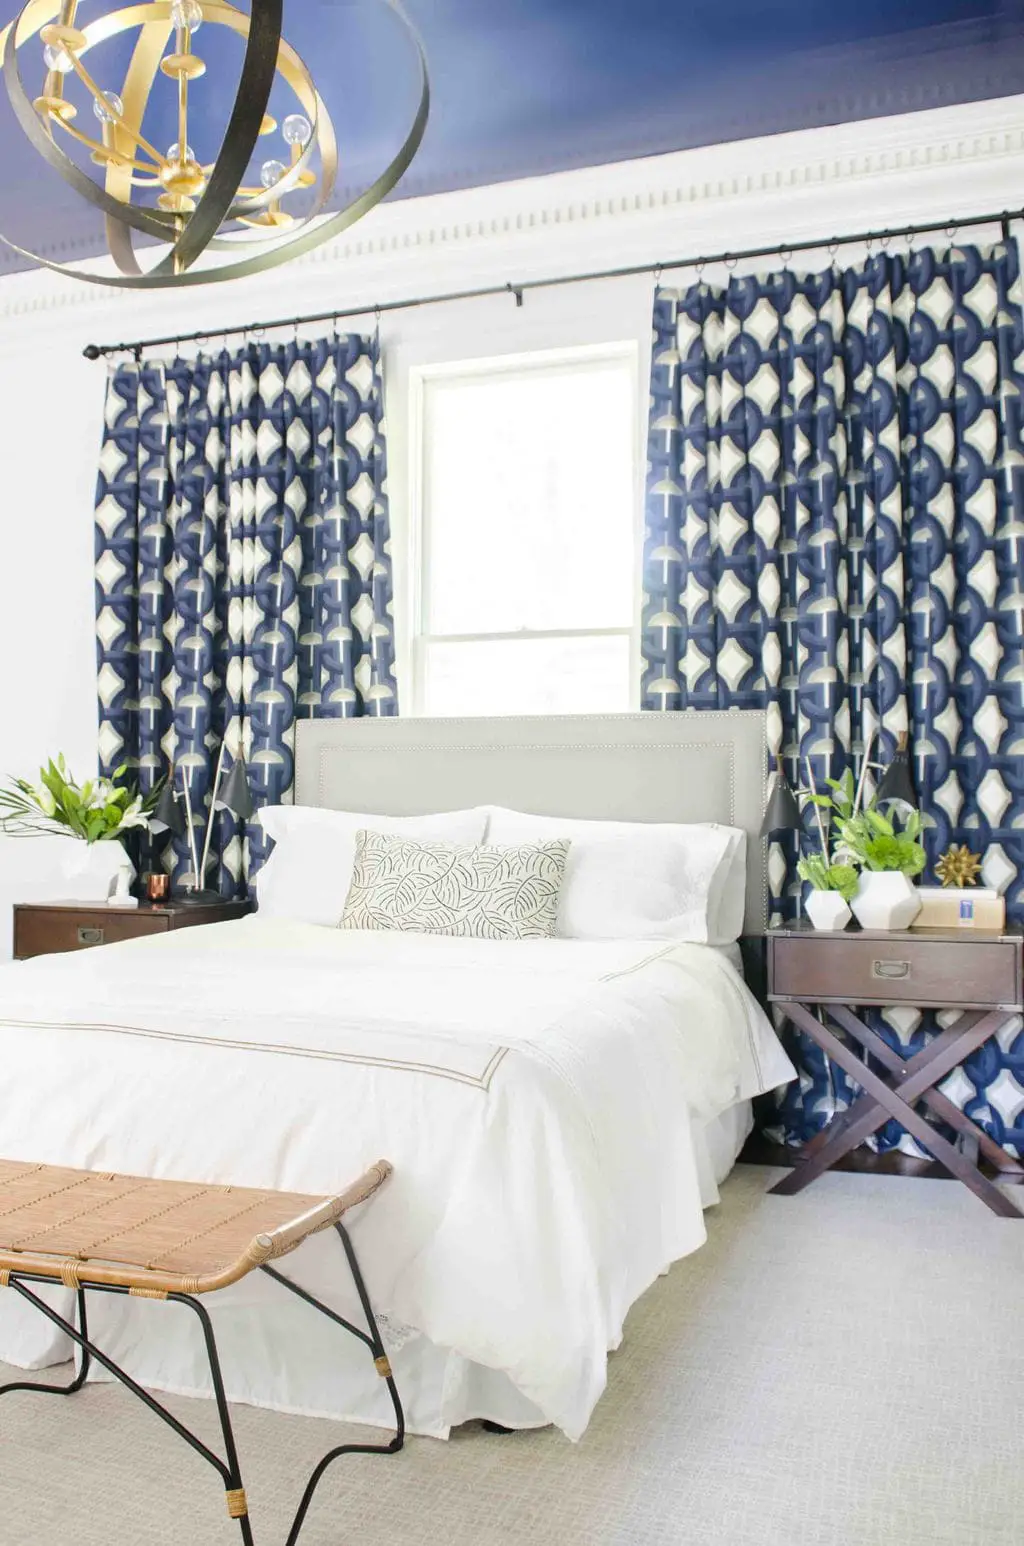 One Room Challenge master bedroom makeover reveal by @thouswellblog